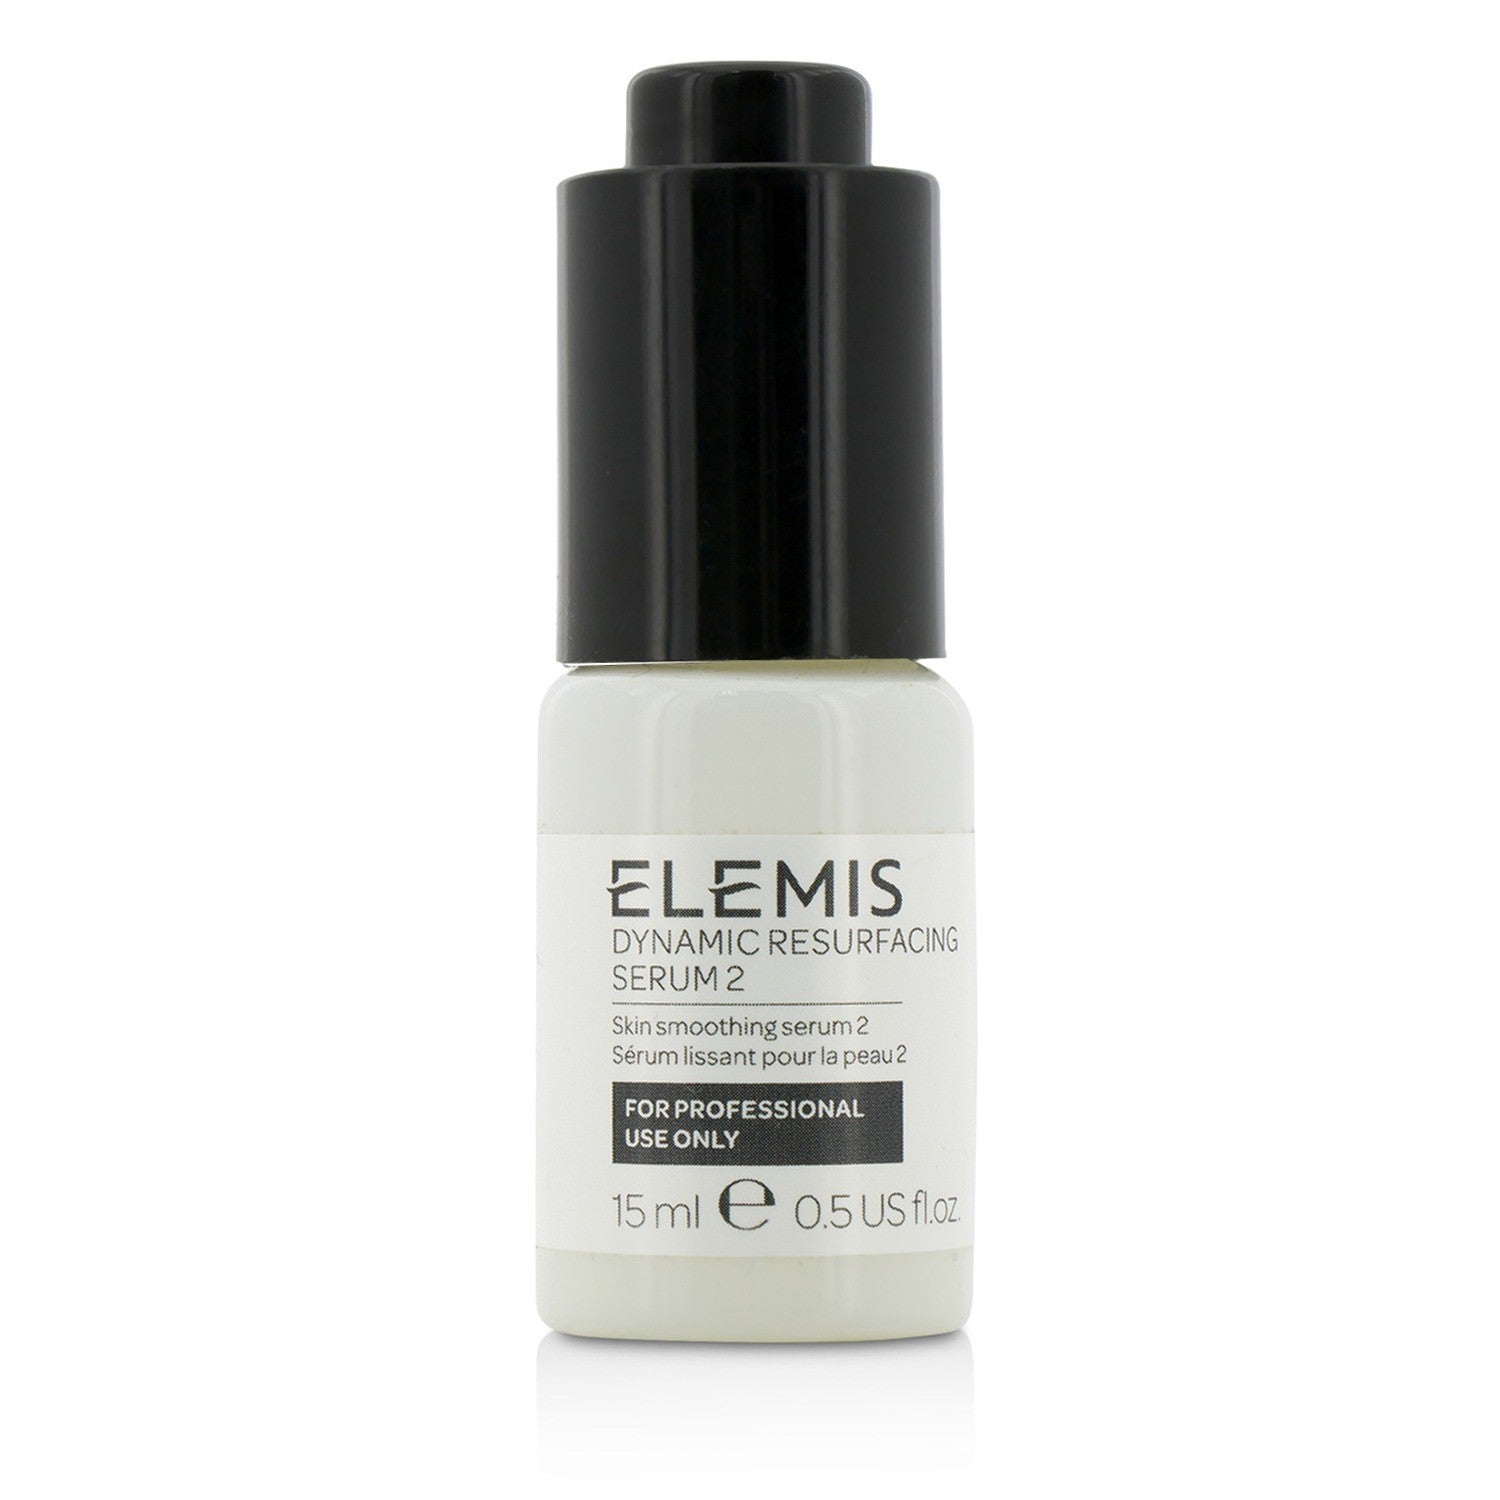 A bottle of Dynamic Resurfacing Serum 2 - Salon Product, labeled for professional use, 15 ml size, isolated on a white background.